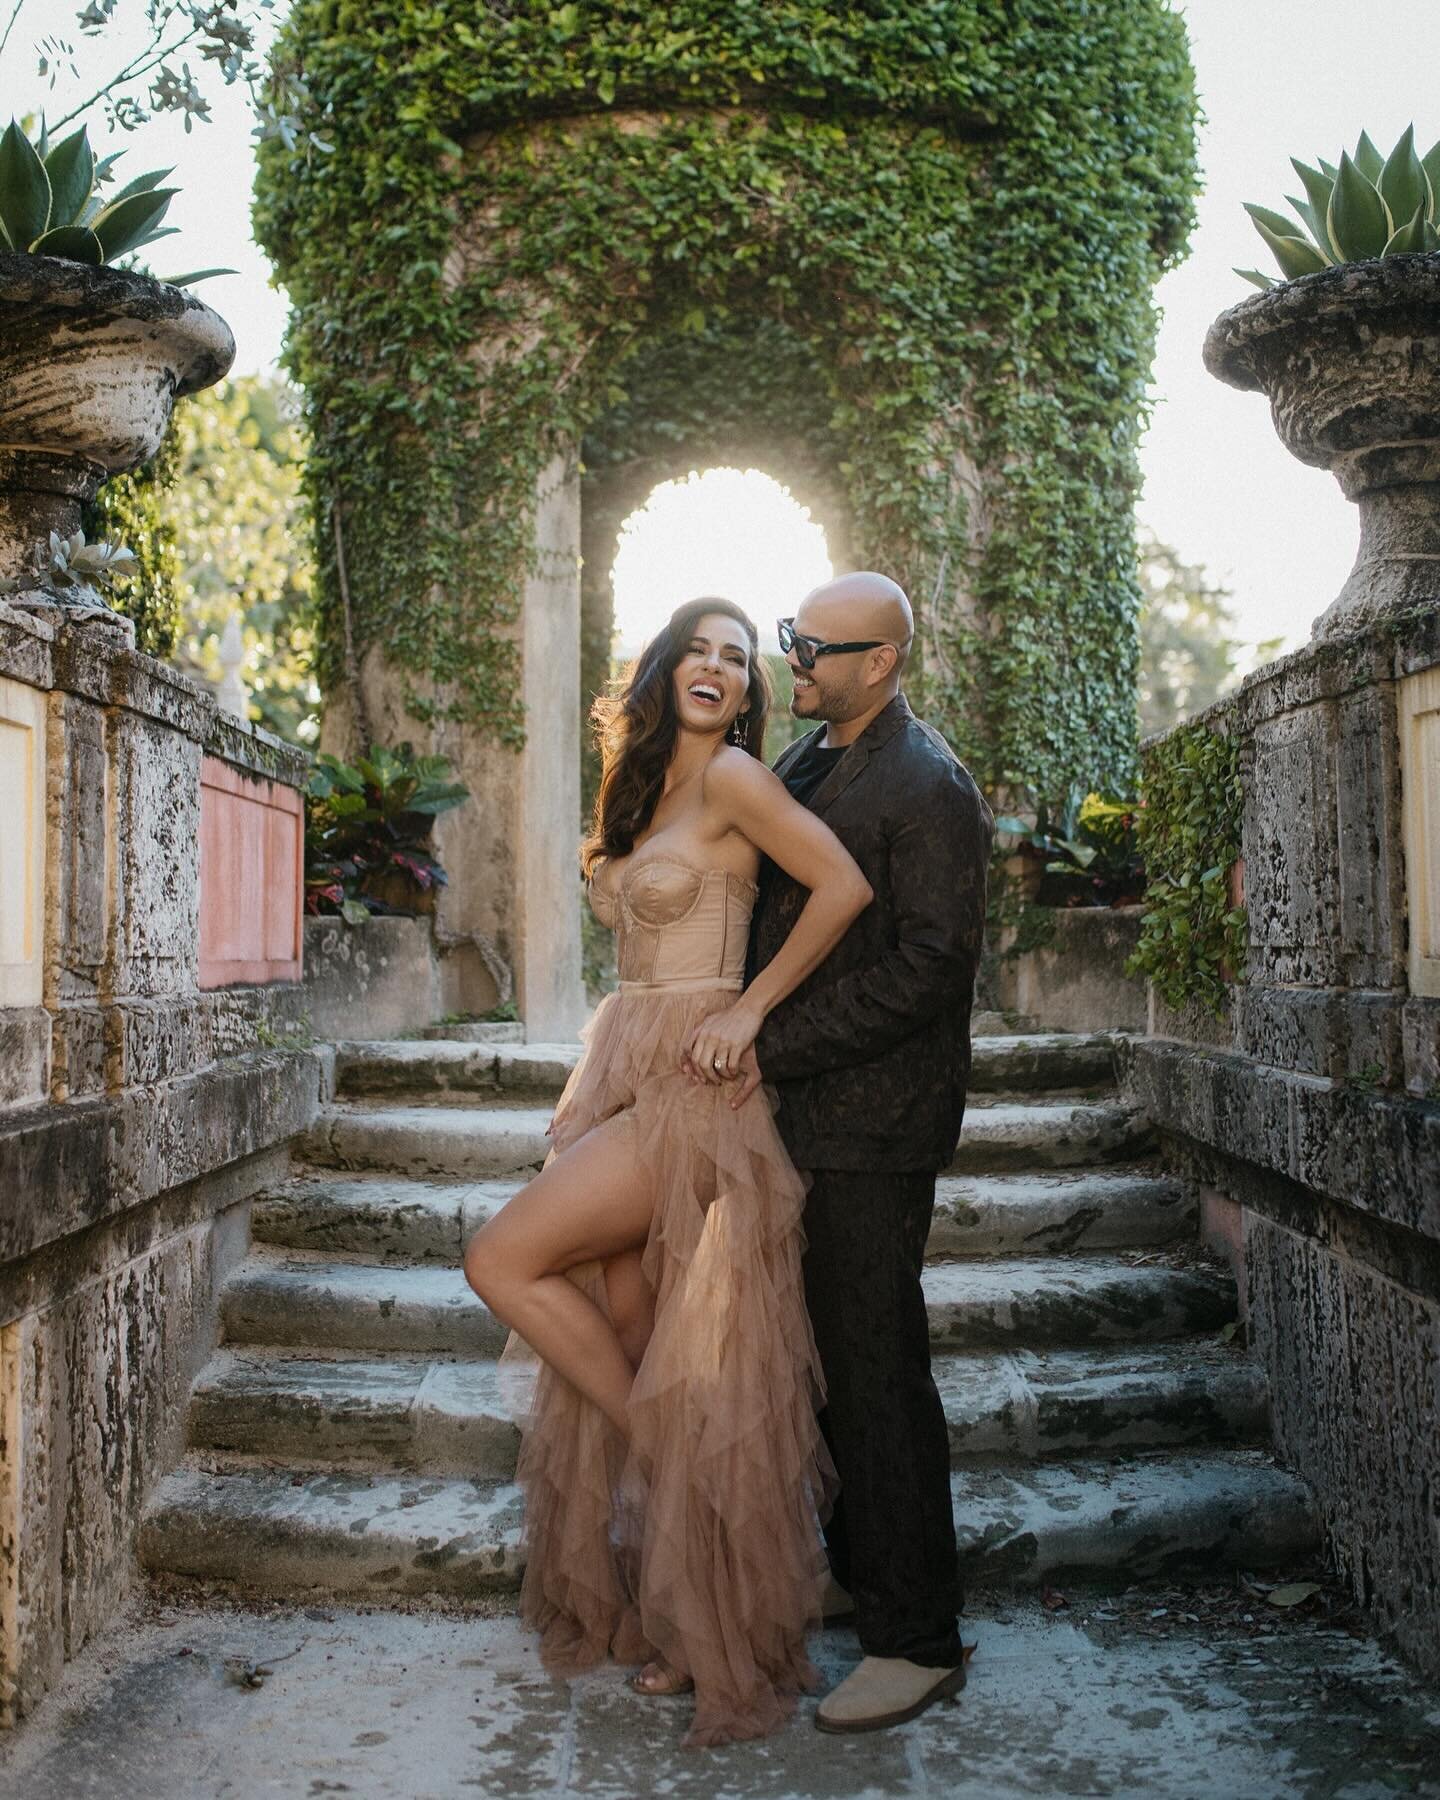 A dream engagement session with @__chady__ and @garibaldiarts at the @vizcayamiami from this past December. The stars definitely aligned for this one, as much as I love to shoot in places I&rsquo;ve been to before, there&rsquo;s a whole new level of 